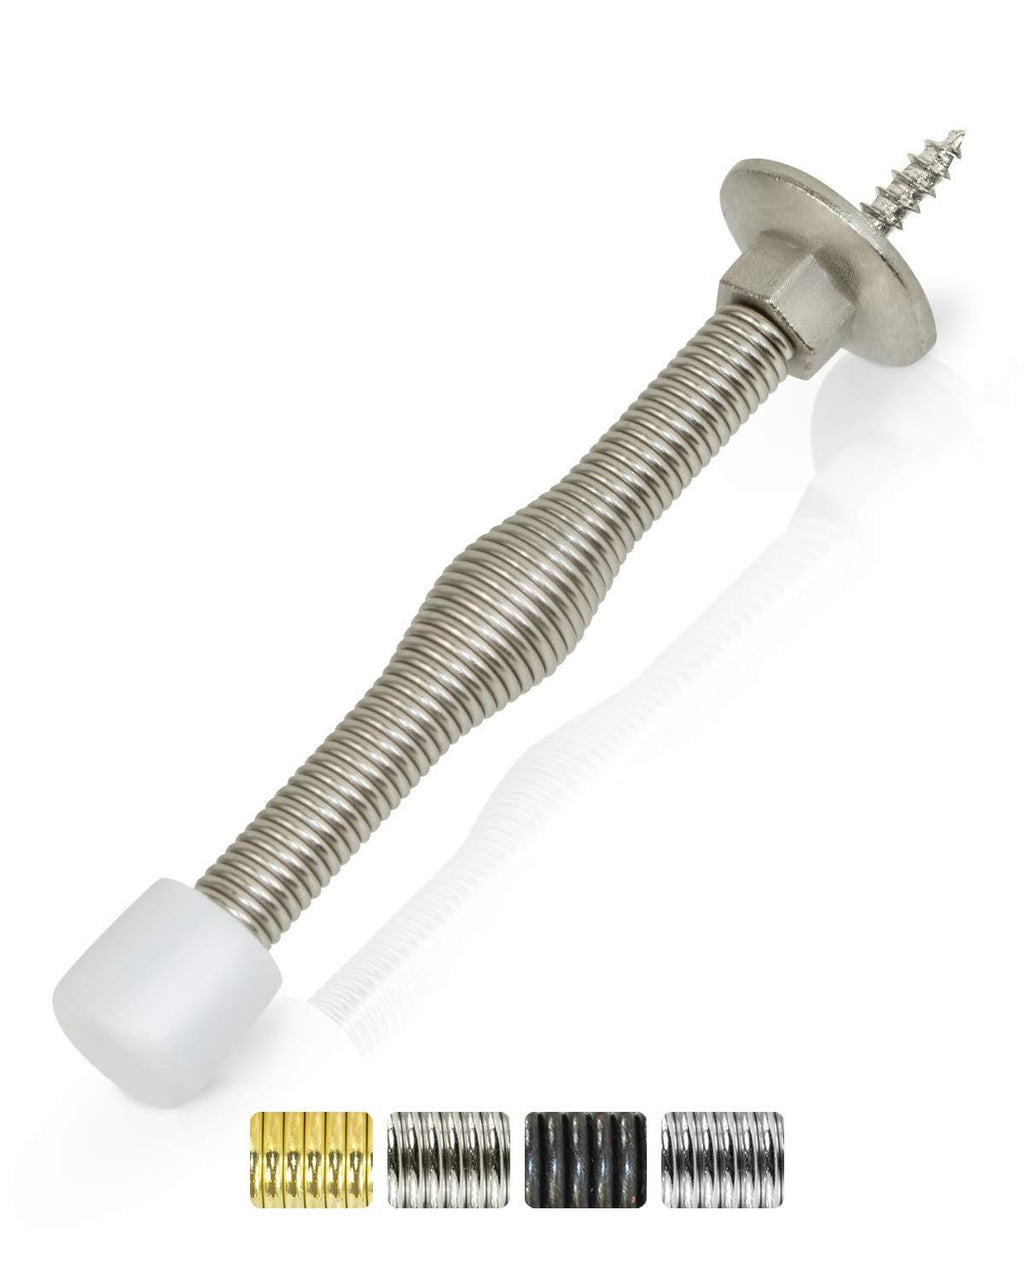 Jack N’ Drill Door Stopper (20 Pack) - 3” Light Duty Spring Door Stop with Flexible Spring and Non-Marking Tip, Screw in Door Stops with Finishes to Match Every Home and Office Satin Nickel - NewNest Australia